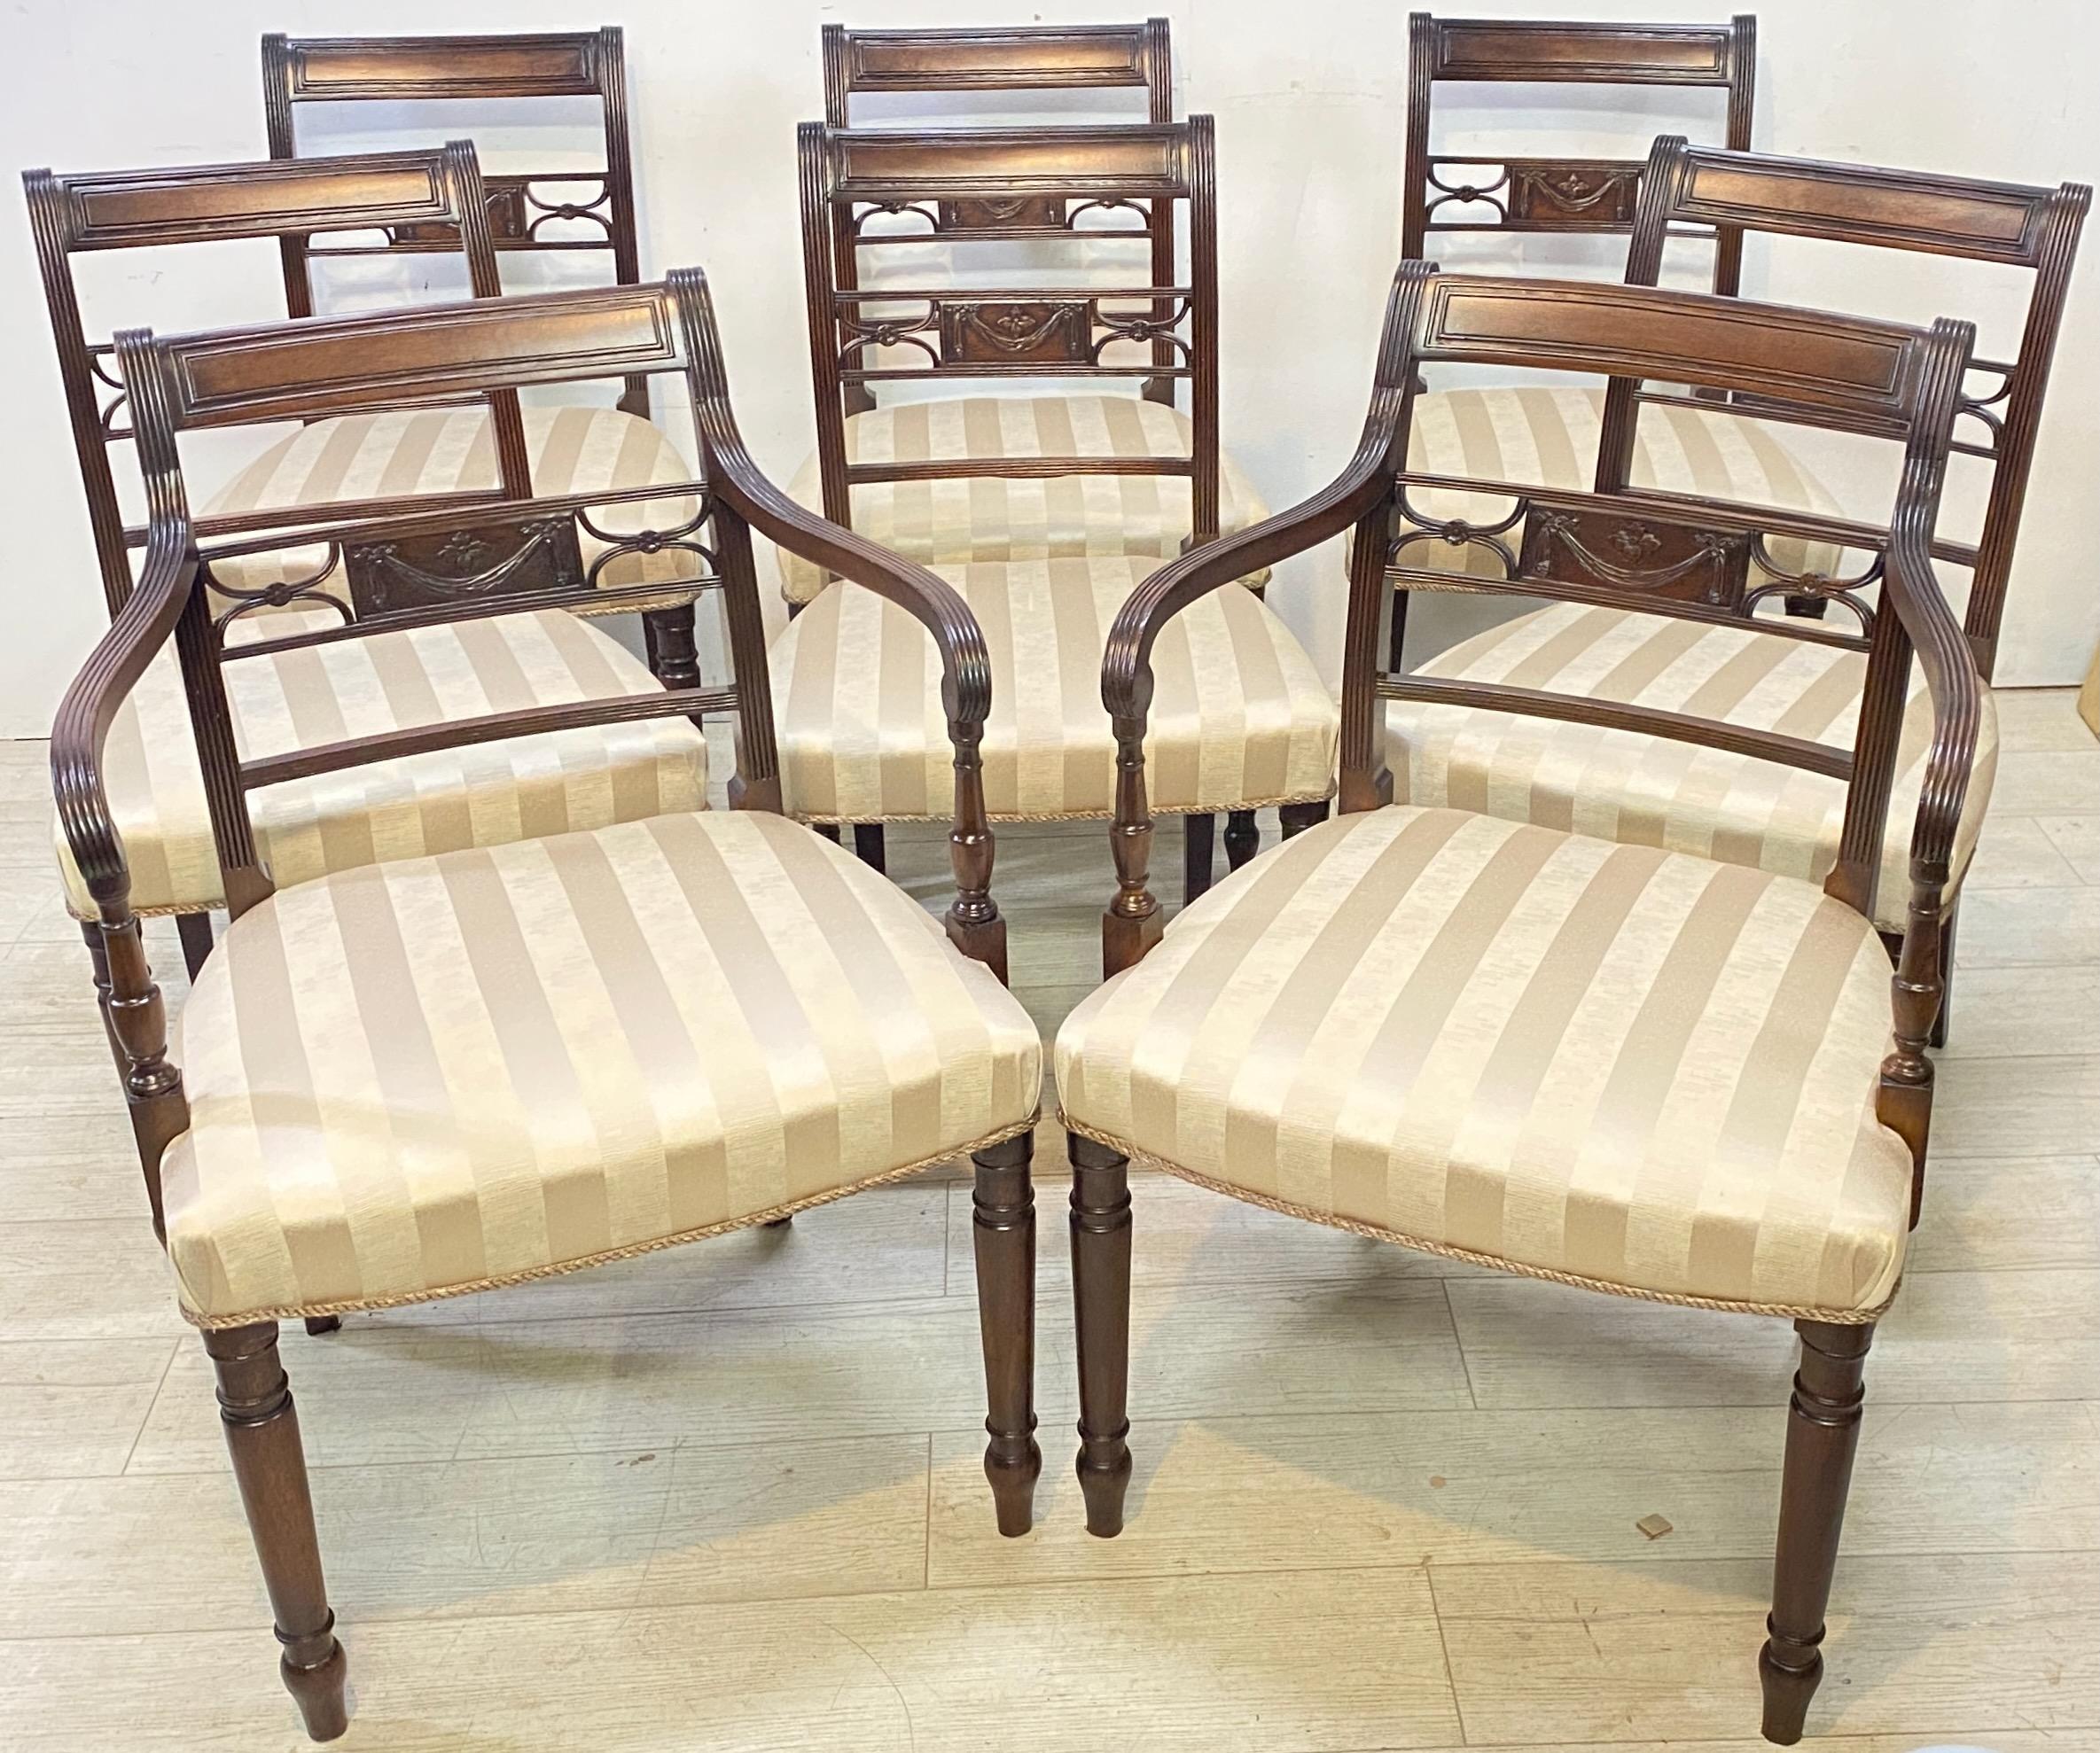 A classic set of eight early 19th century George III period mahogany chairs in excellent condition. Consisting of two armchairs and six side chairs.
Recently re-upholstered and refreshed original finish. Very sturdy, extremely comfortable and ready